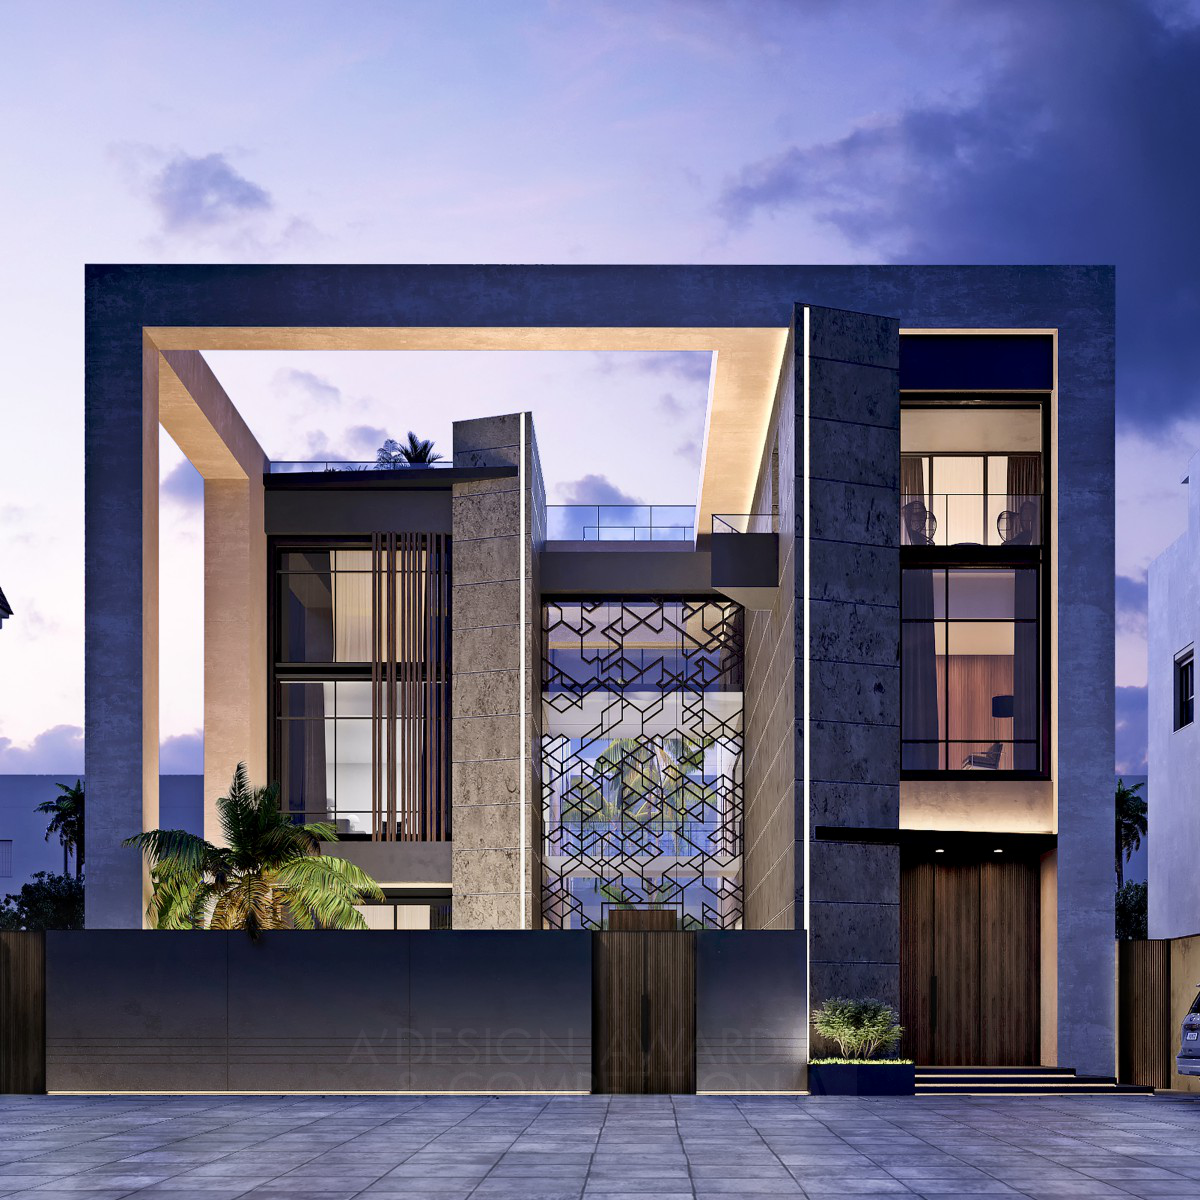 The Cube Private House by Ahmed Habib